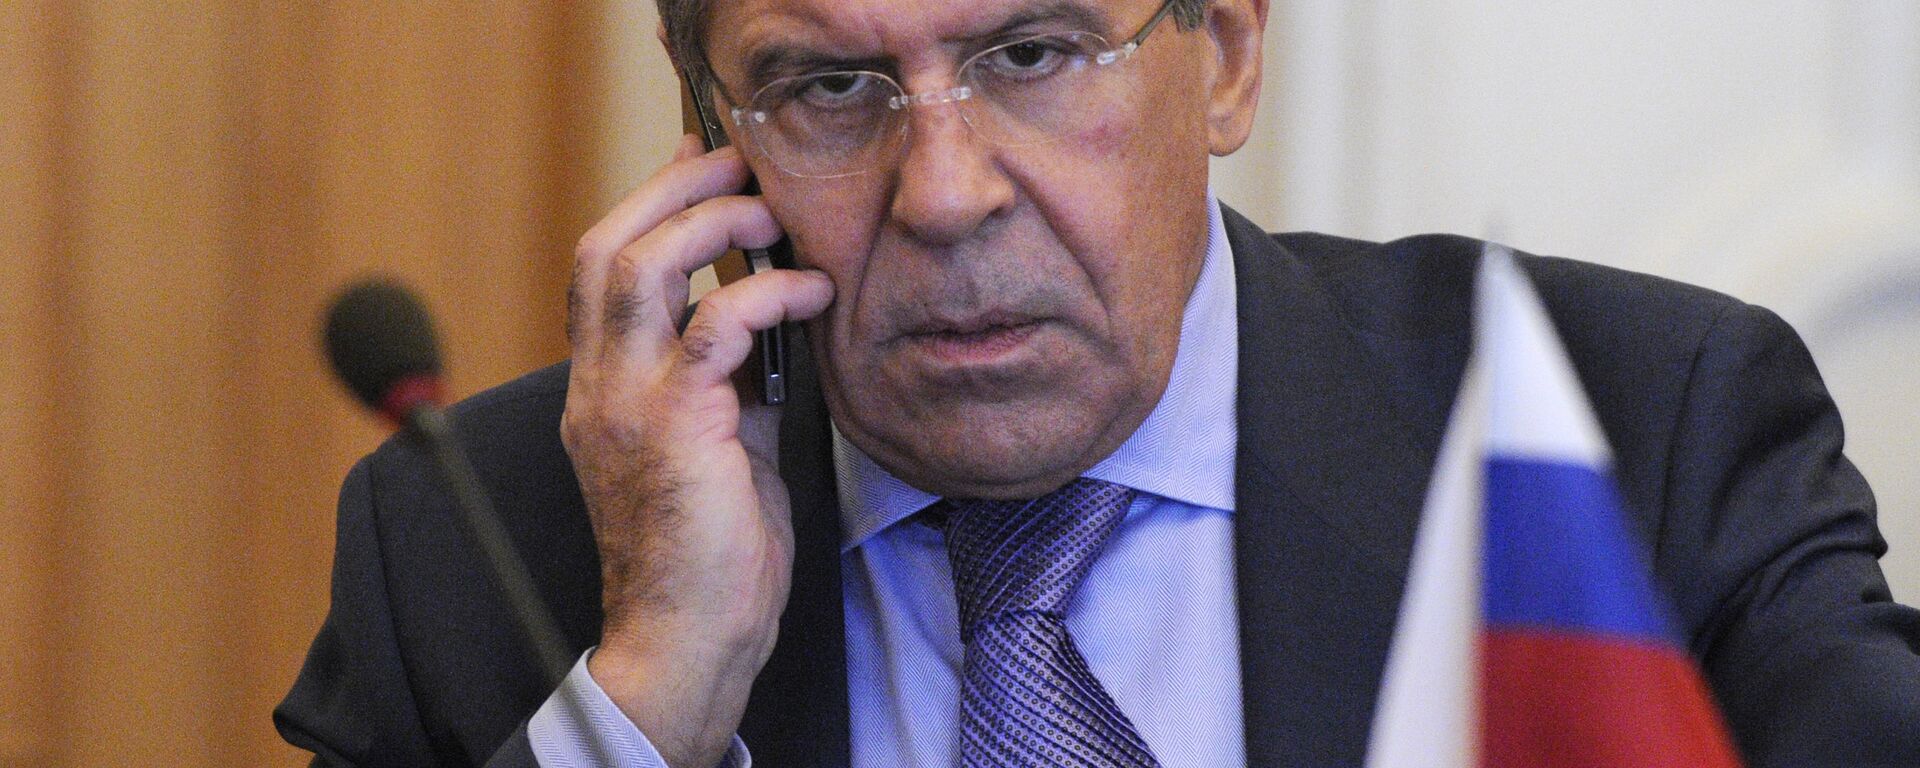 Russian Foreign Minister Sergey Lavrov speaks on the phone during a meeting with the Ukraine's Foreign Minister Kostyantyn Gryshchenko in Kiev, Ukraine, Friday, Oct. 19, 2012 - Sputnik International, 1920, 26.02.2022